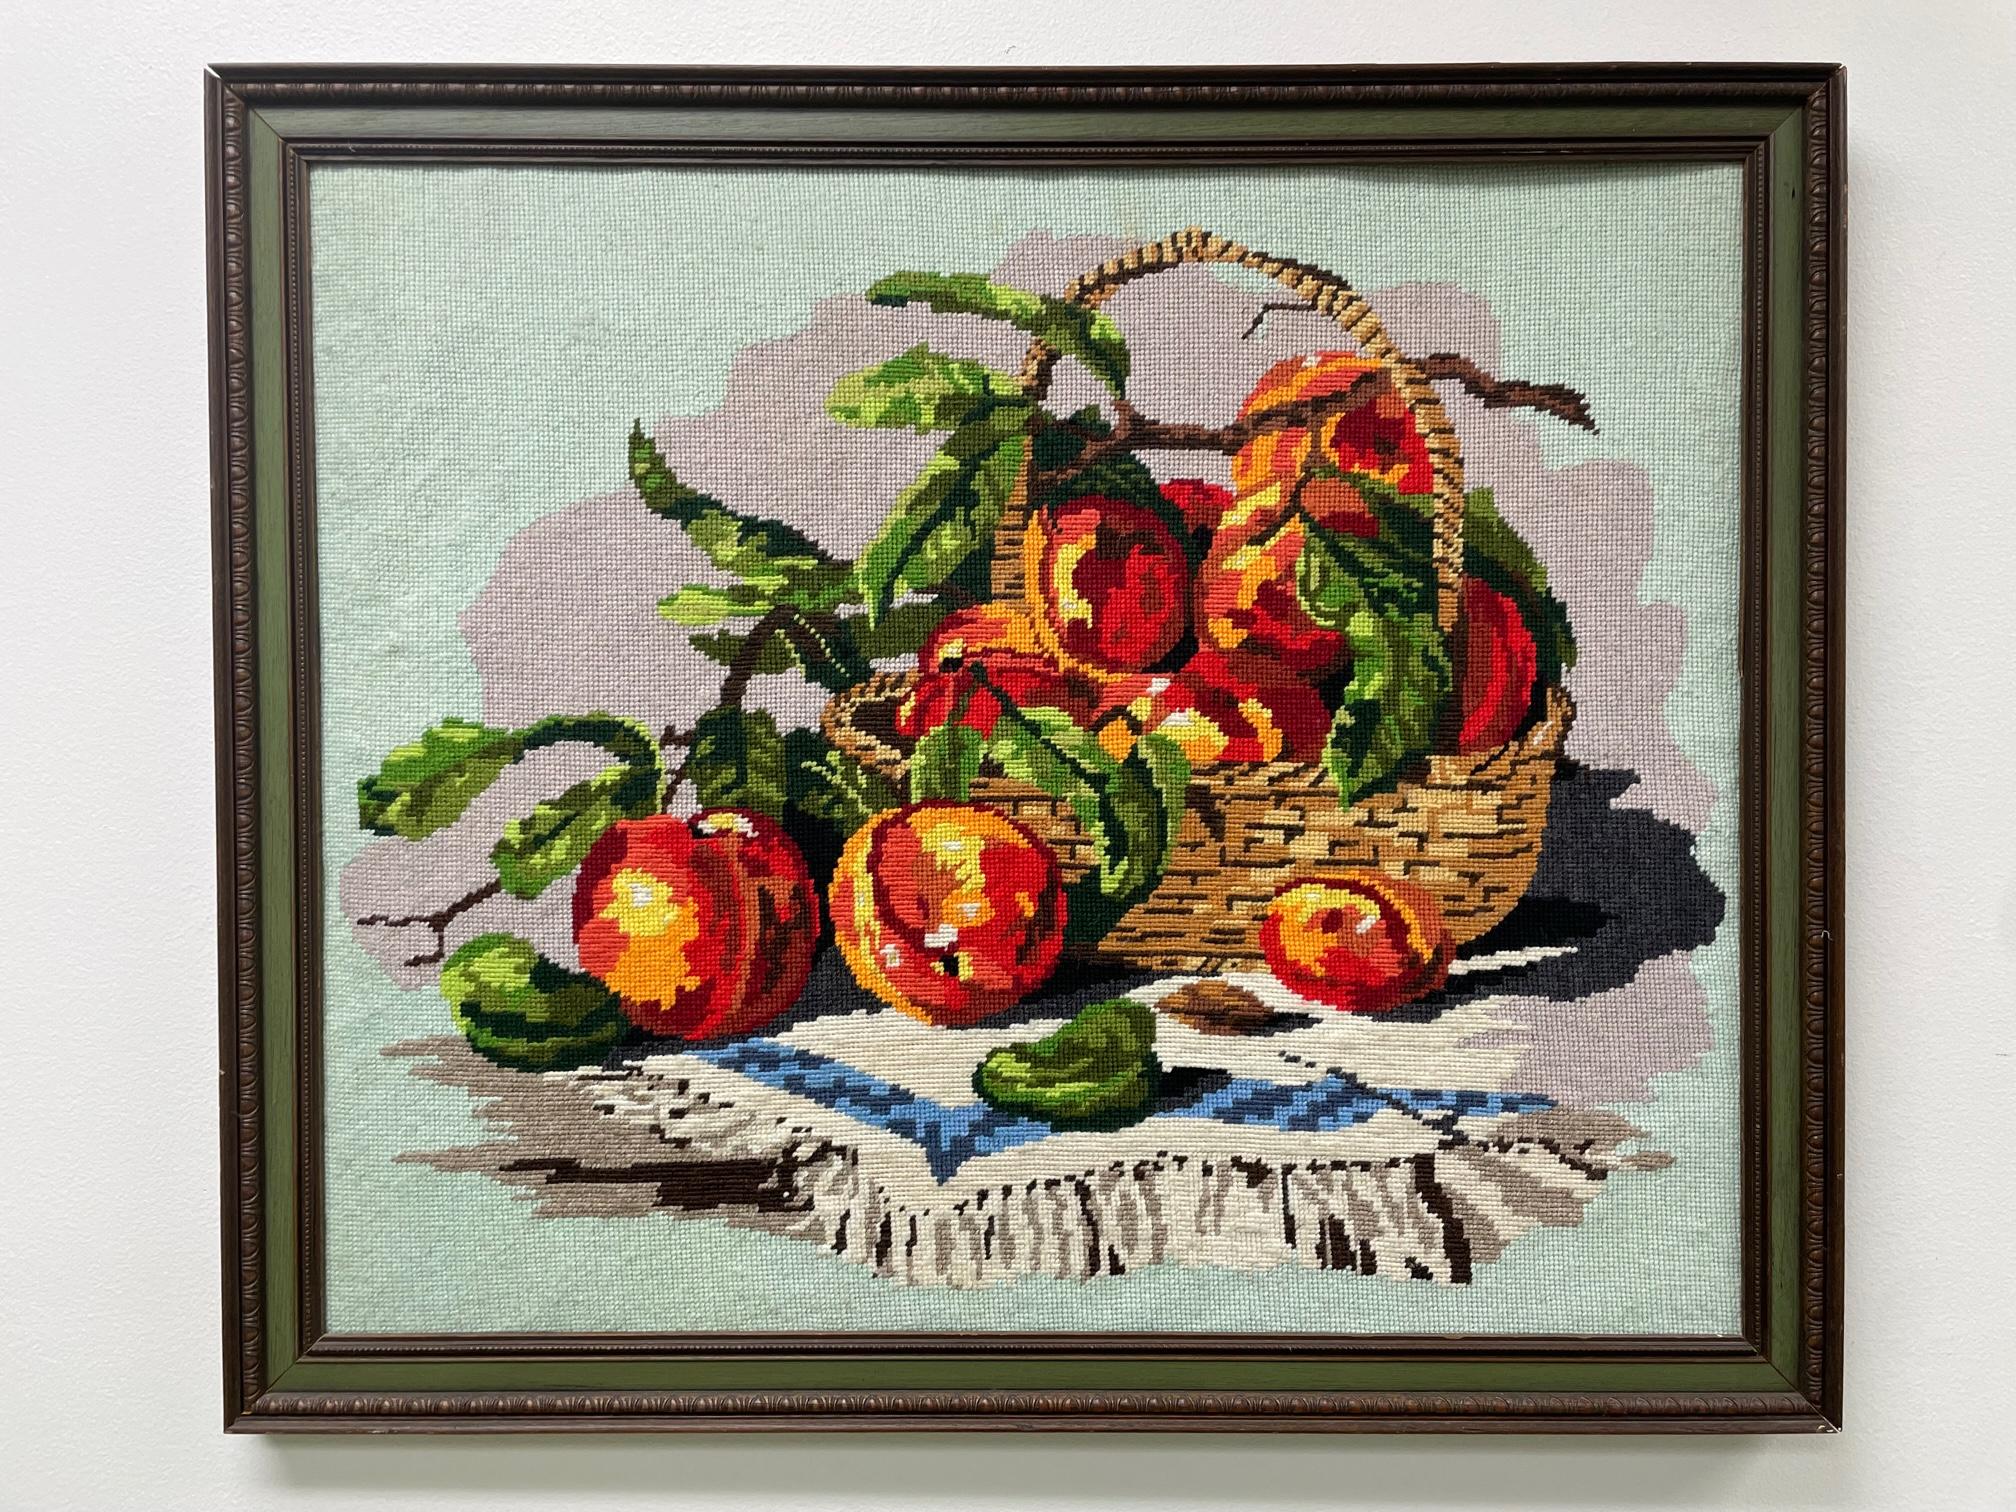 Vintage framed needlepoint features an intricate still life image of a fruit bowl and a solid wood frame. Good condition with minor imperfections consistent with age, see photos for condition details.
For a shipping quote to your exact zip code,